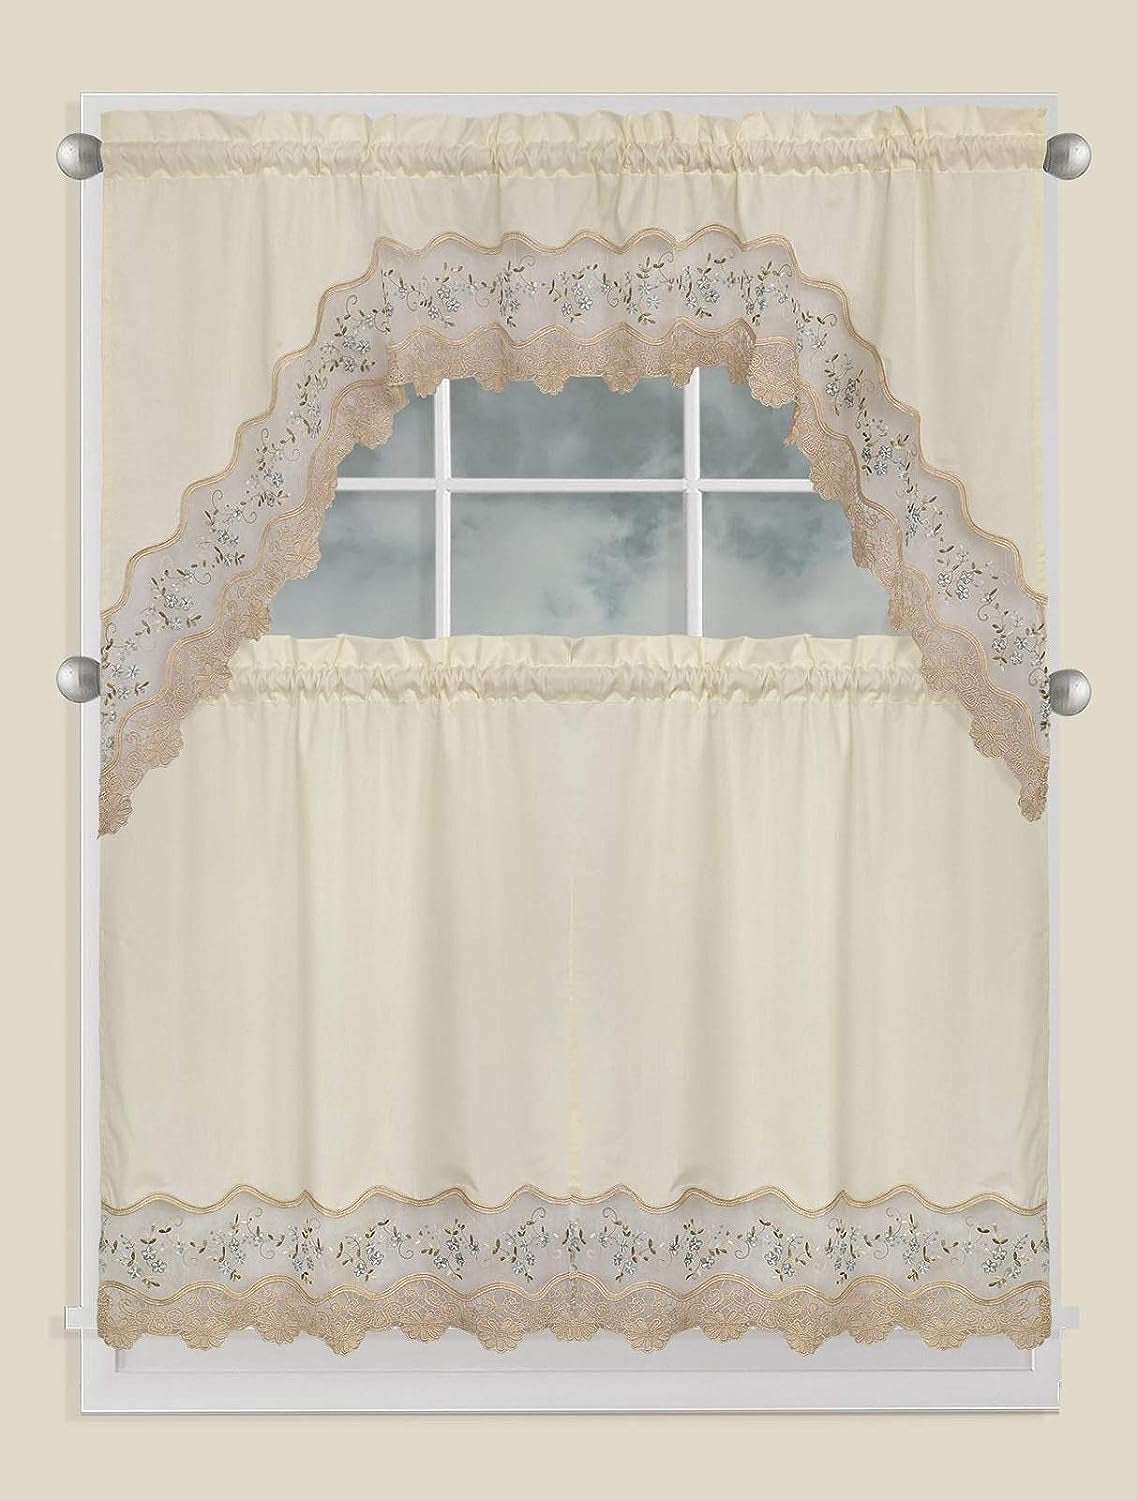 Fancy Collection 3Pc Beige with Embroidery Floral Kitchen/Cafe Curtain Tier and Valance Set 001092 (60" X 38", Gold/Beige/Beige)